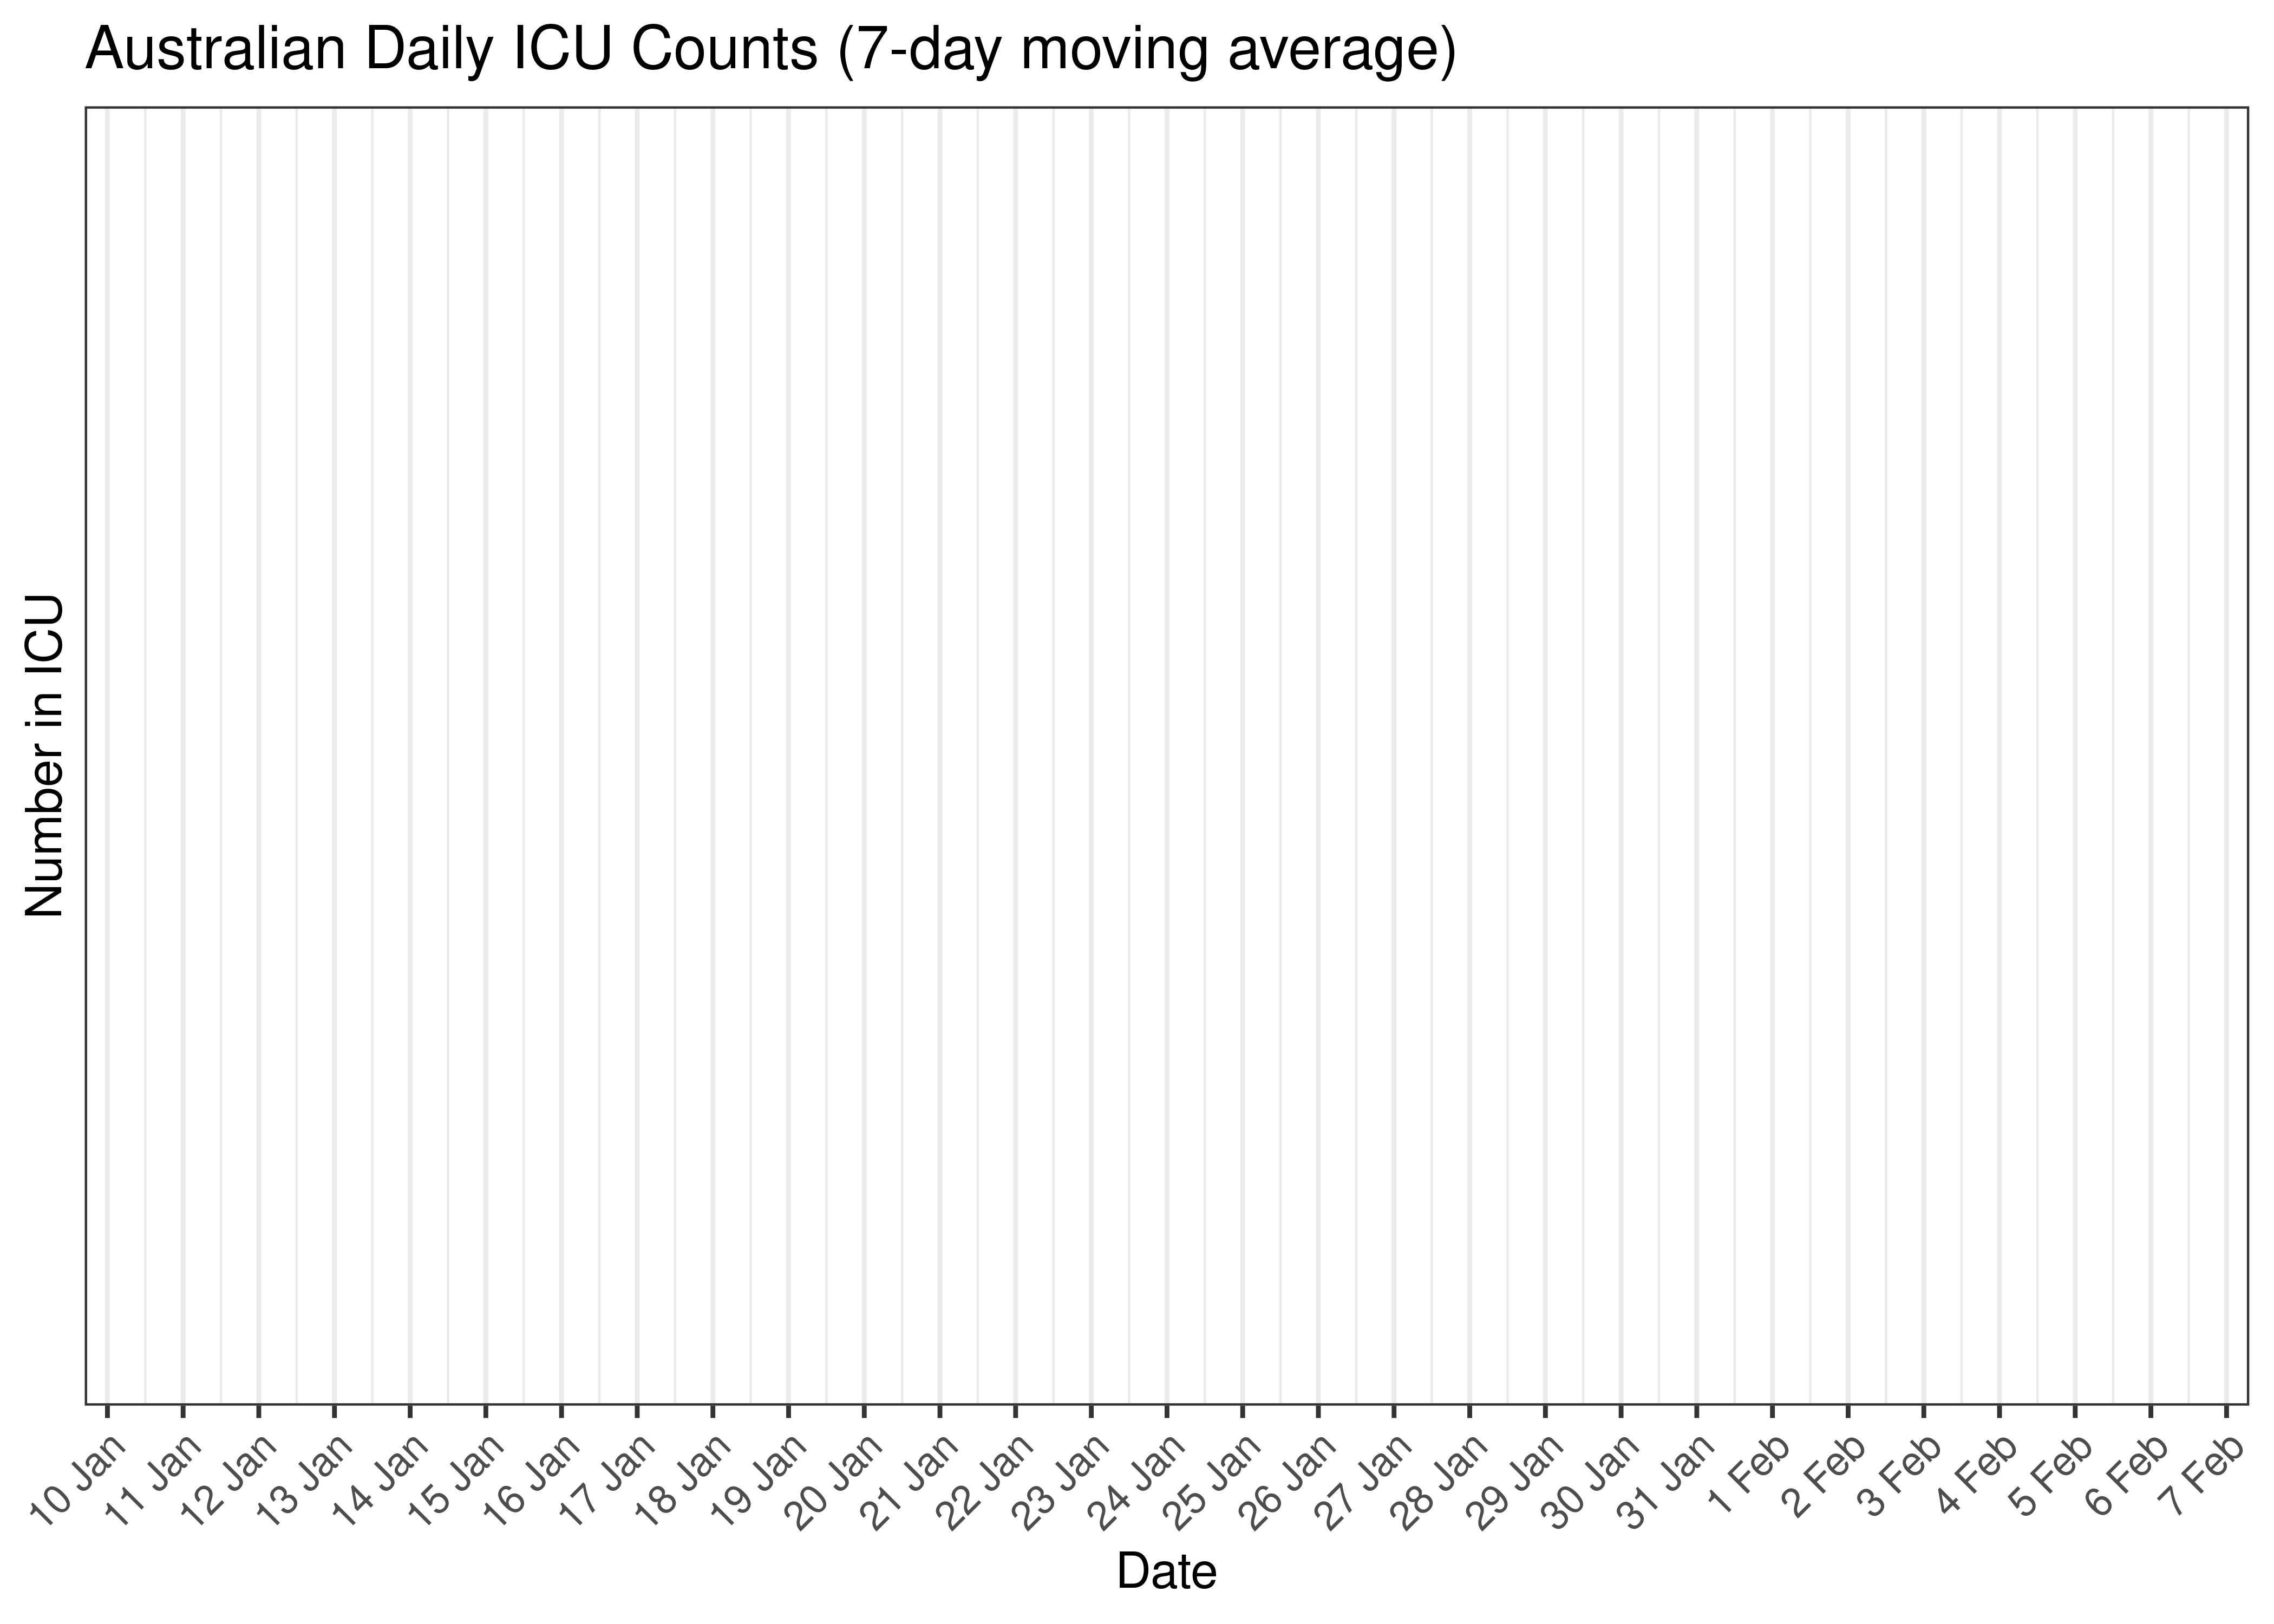 Australian Daily ICU Counts for Last 30-days (7-day moving average)